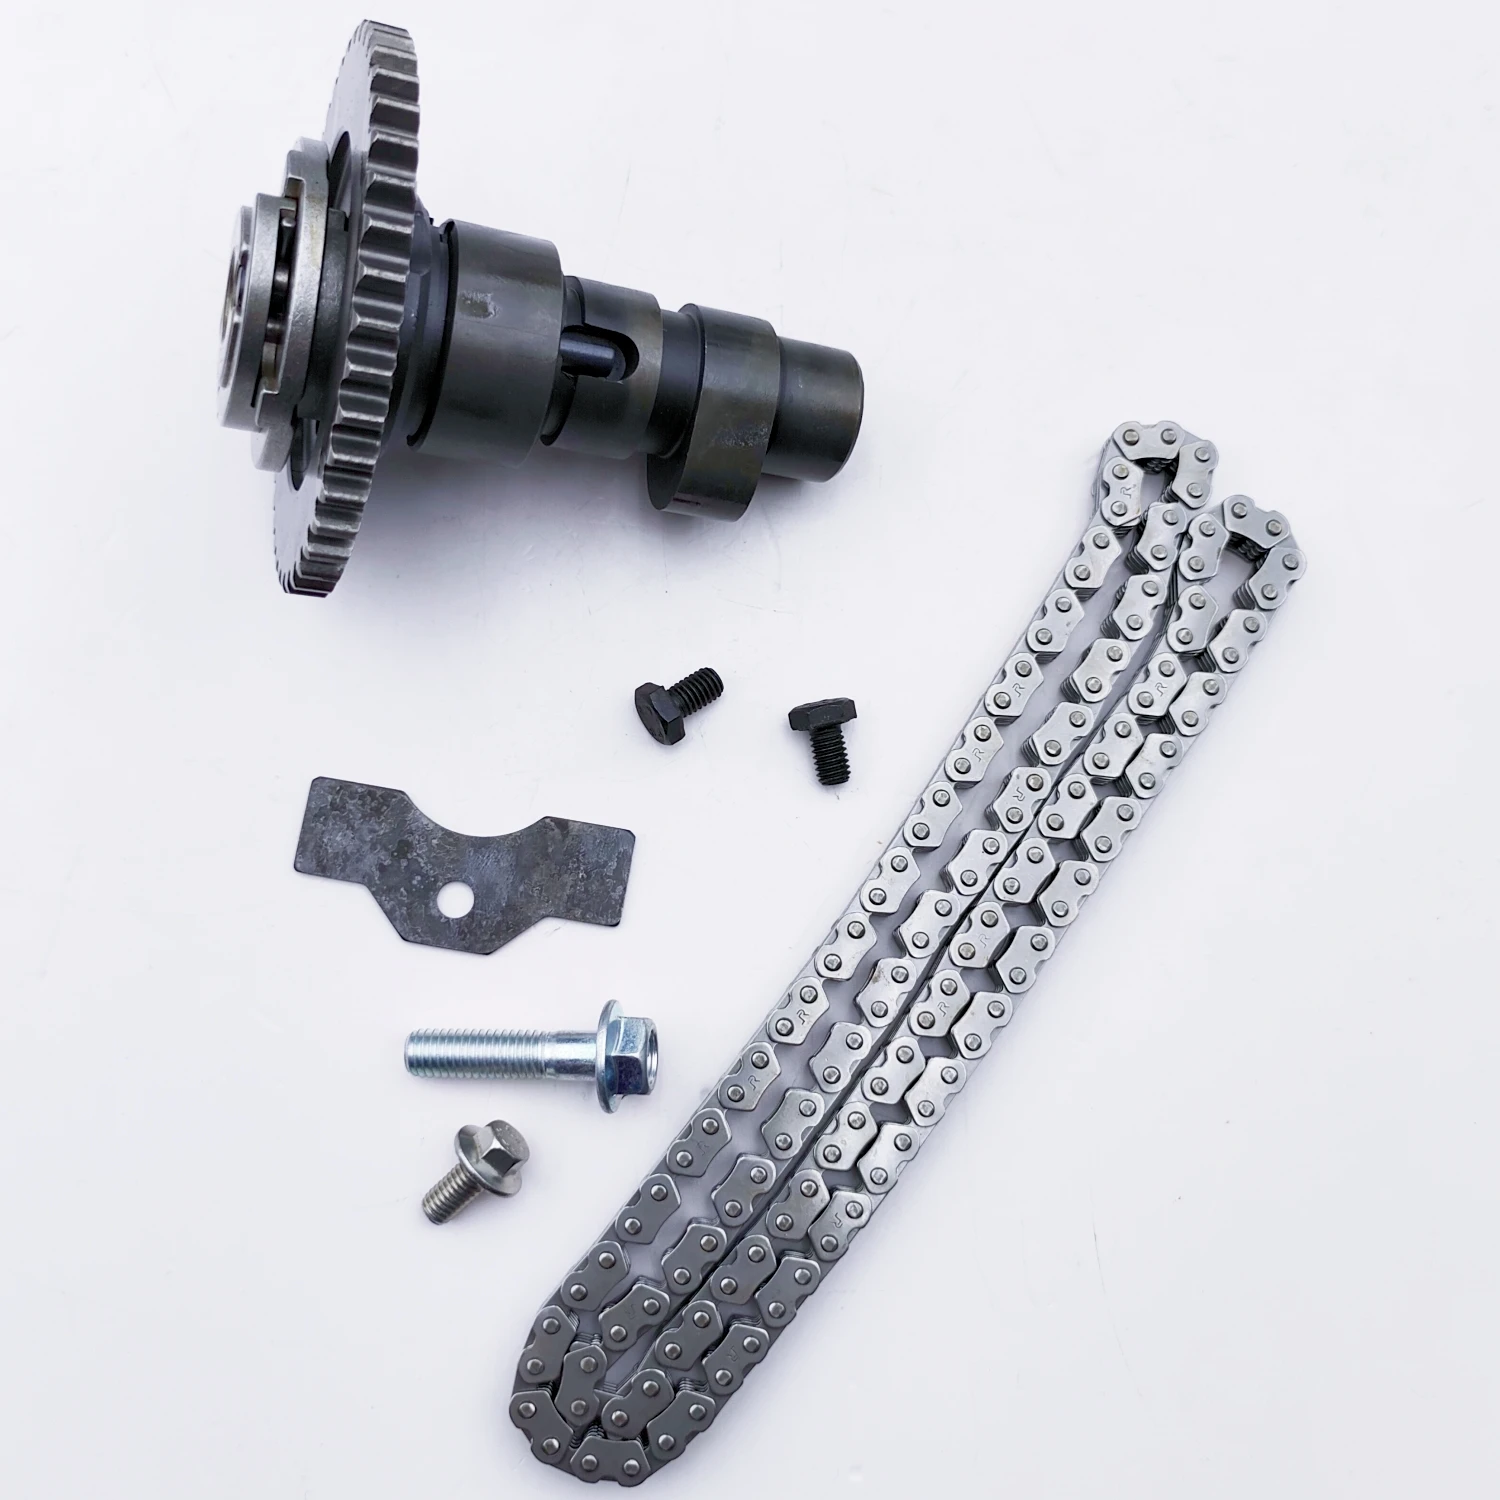 Camshaft Assy with Timing Chain for CFMoto 500S 520 500HO X5H.O. 550 X550 U550 Z550 191R Gladiator Goes Cobalt 550i 0GR0-024000 hexagonal bore washer with nut for cfmoto 400 450 500s 520 500ho x5ho 550 x550 u550 z550 600 touring 625